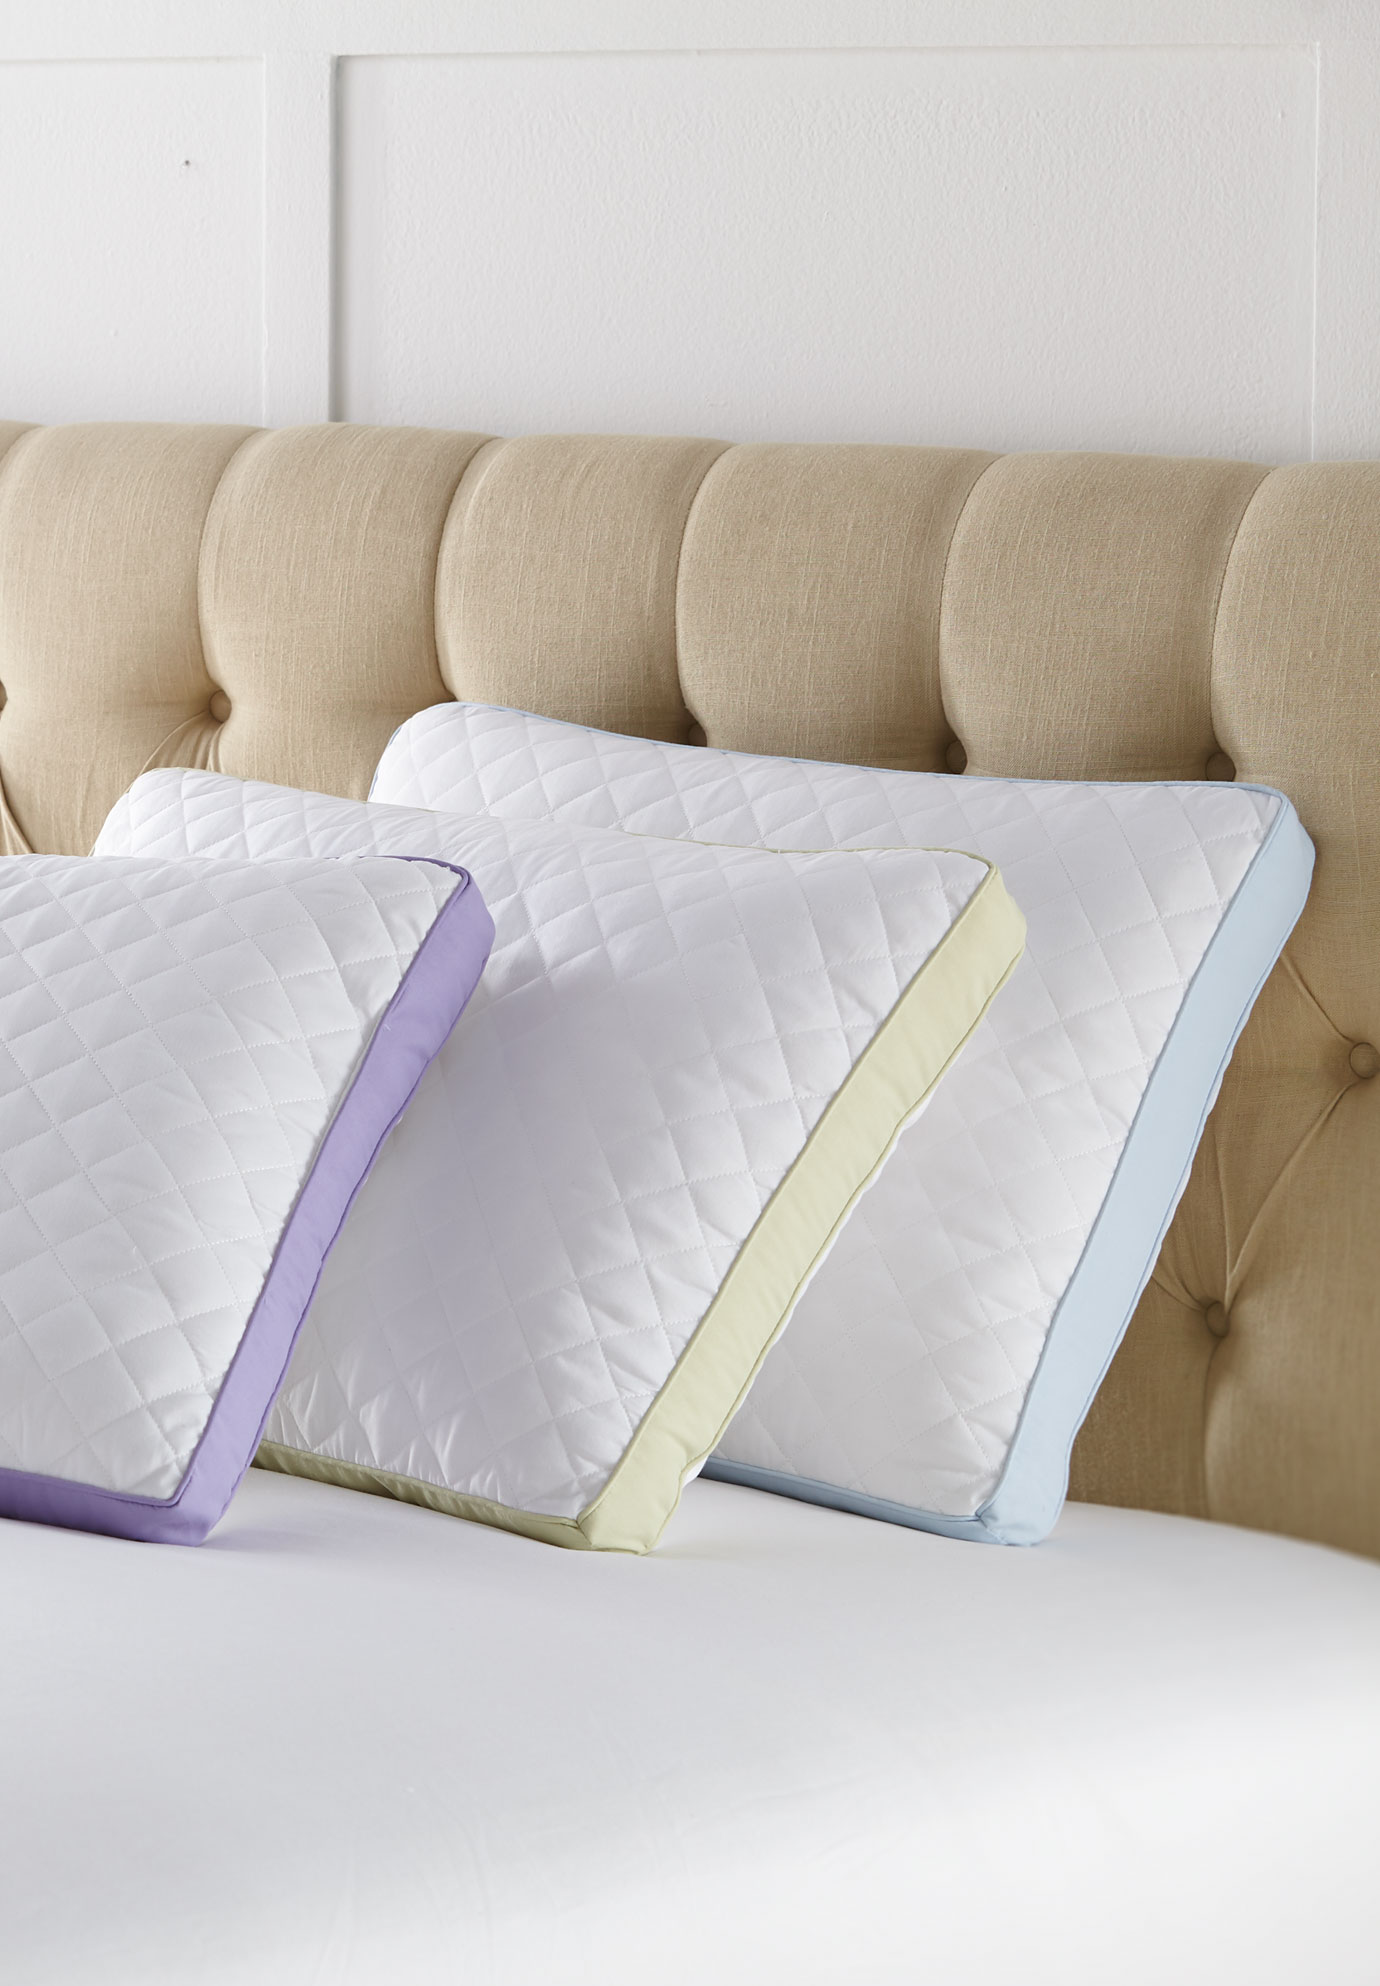 Sleeper Gusseted Density 2-Pack Pillow Collection, 